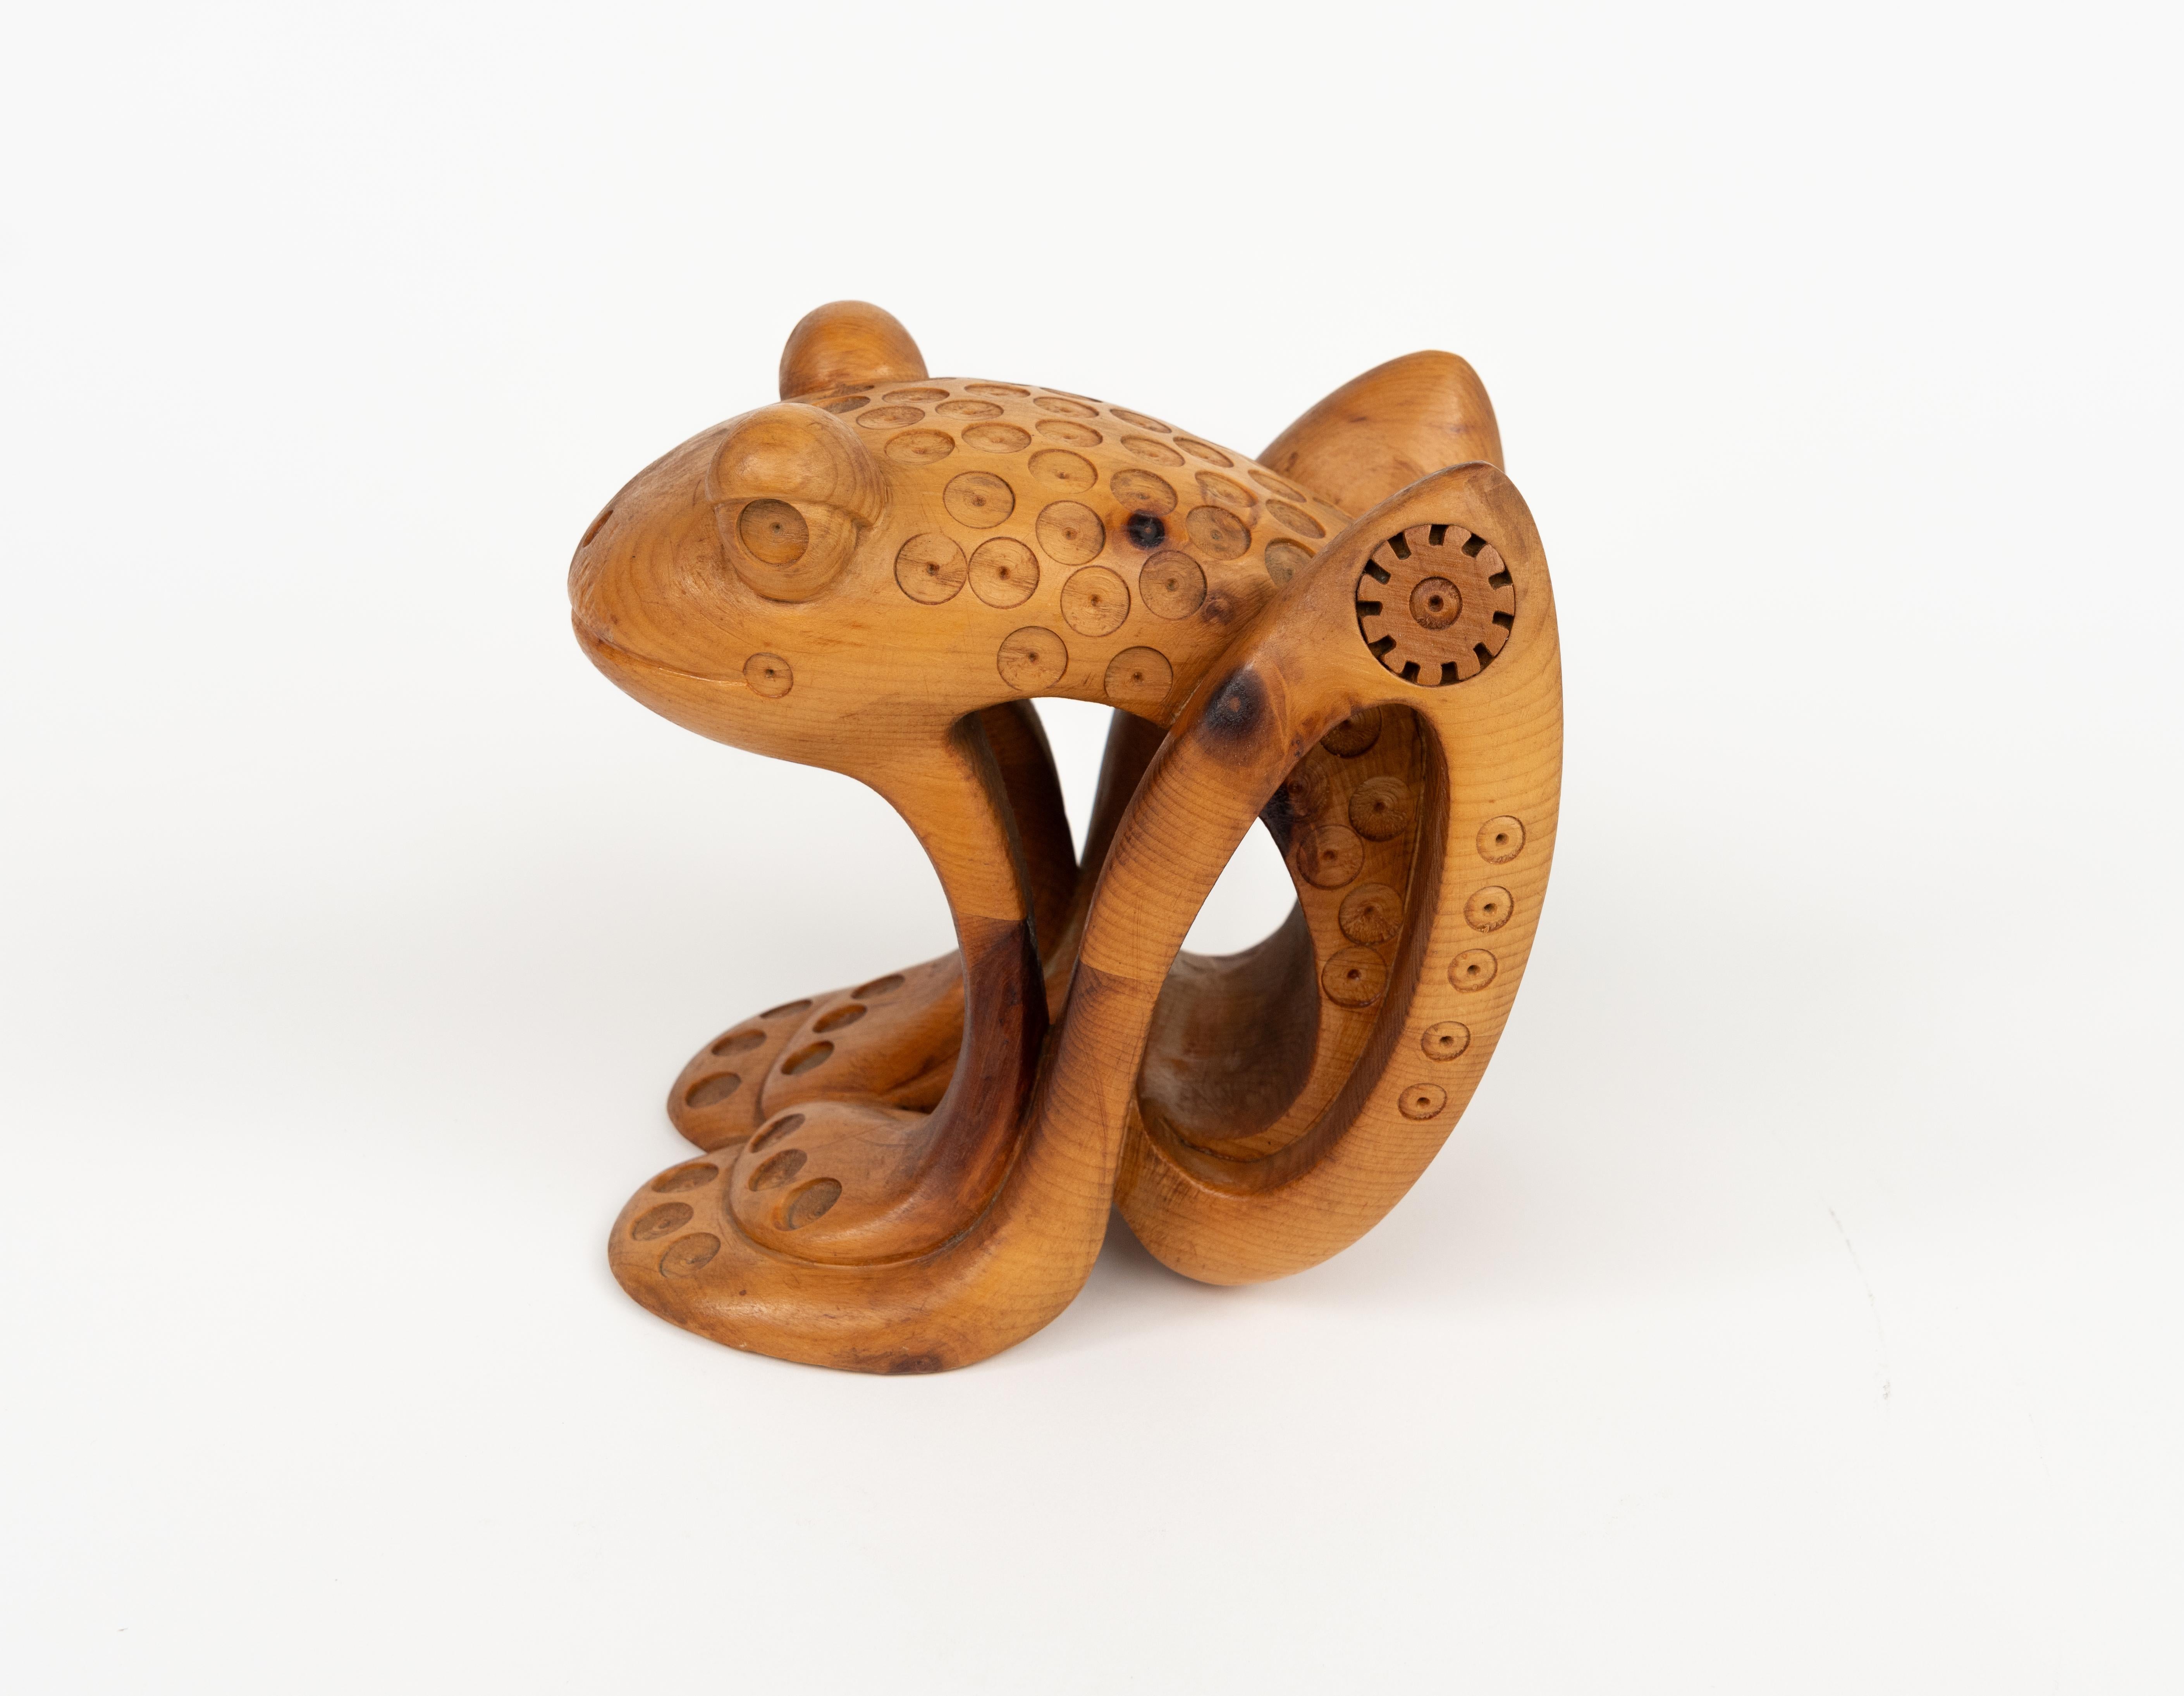 Pine Wood Decorative Sculpture Shape Frog by Ferdinando Codognotto, Italy 2001 For Sale 9